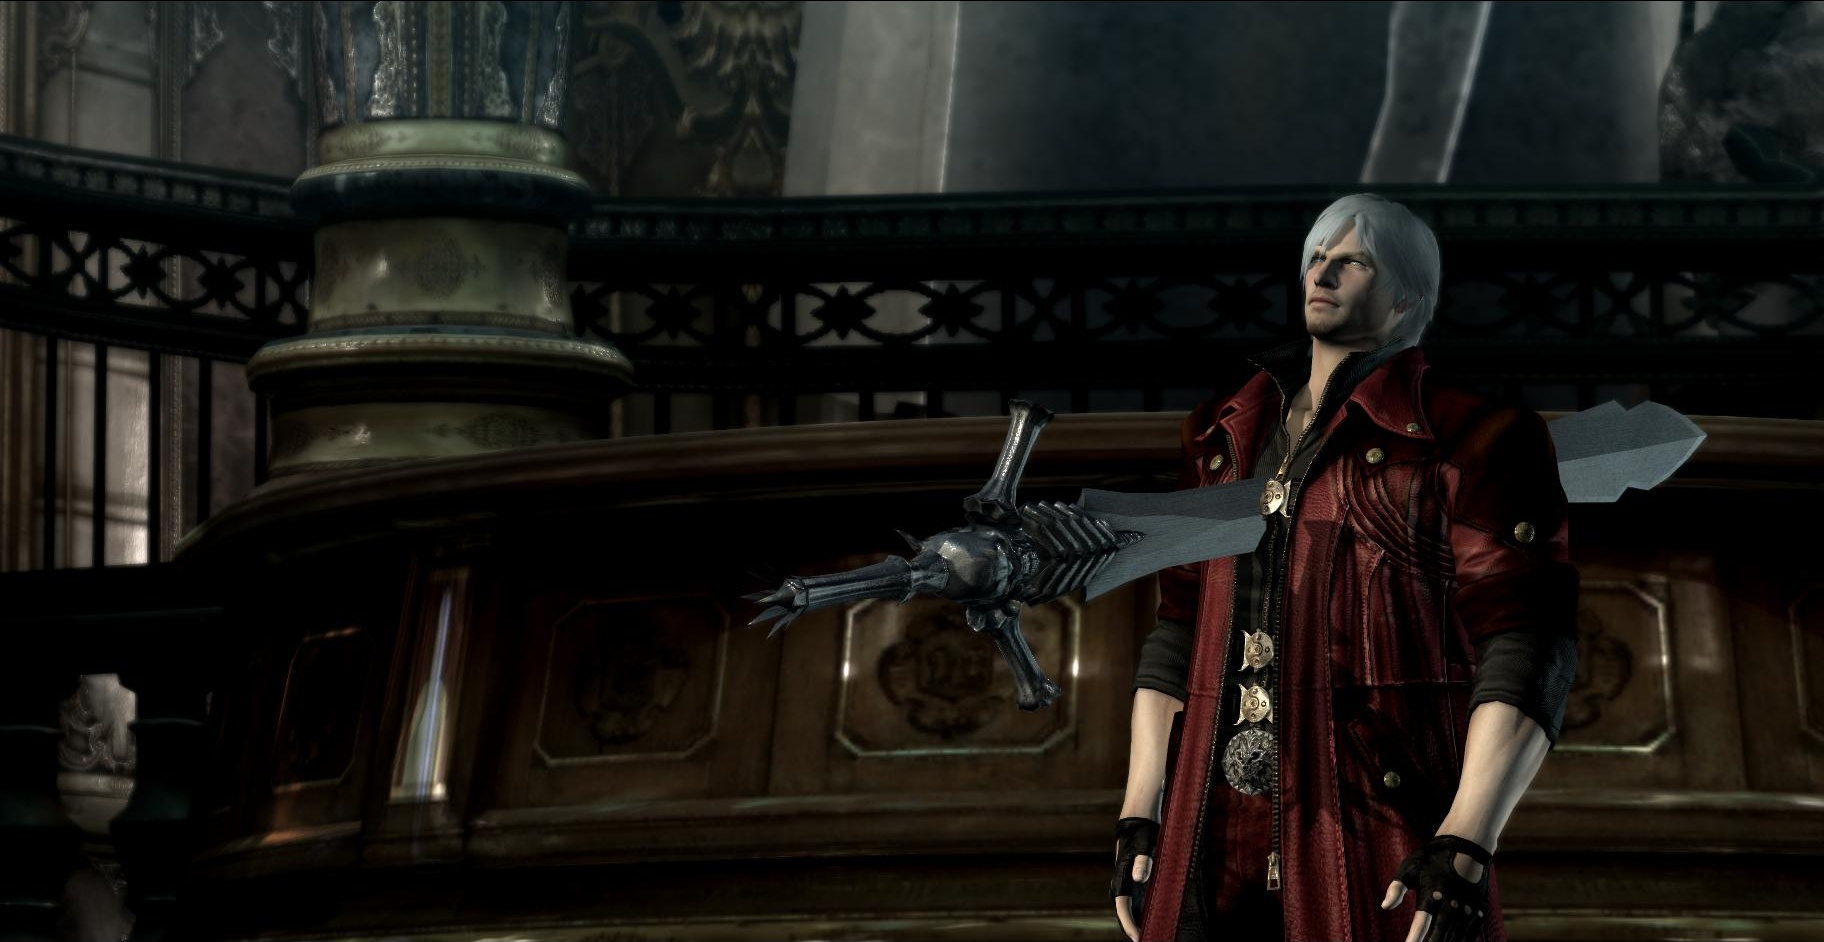 Devil may cry 3 can find steam фото 105